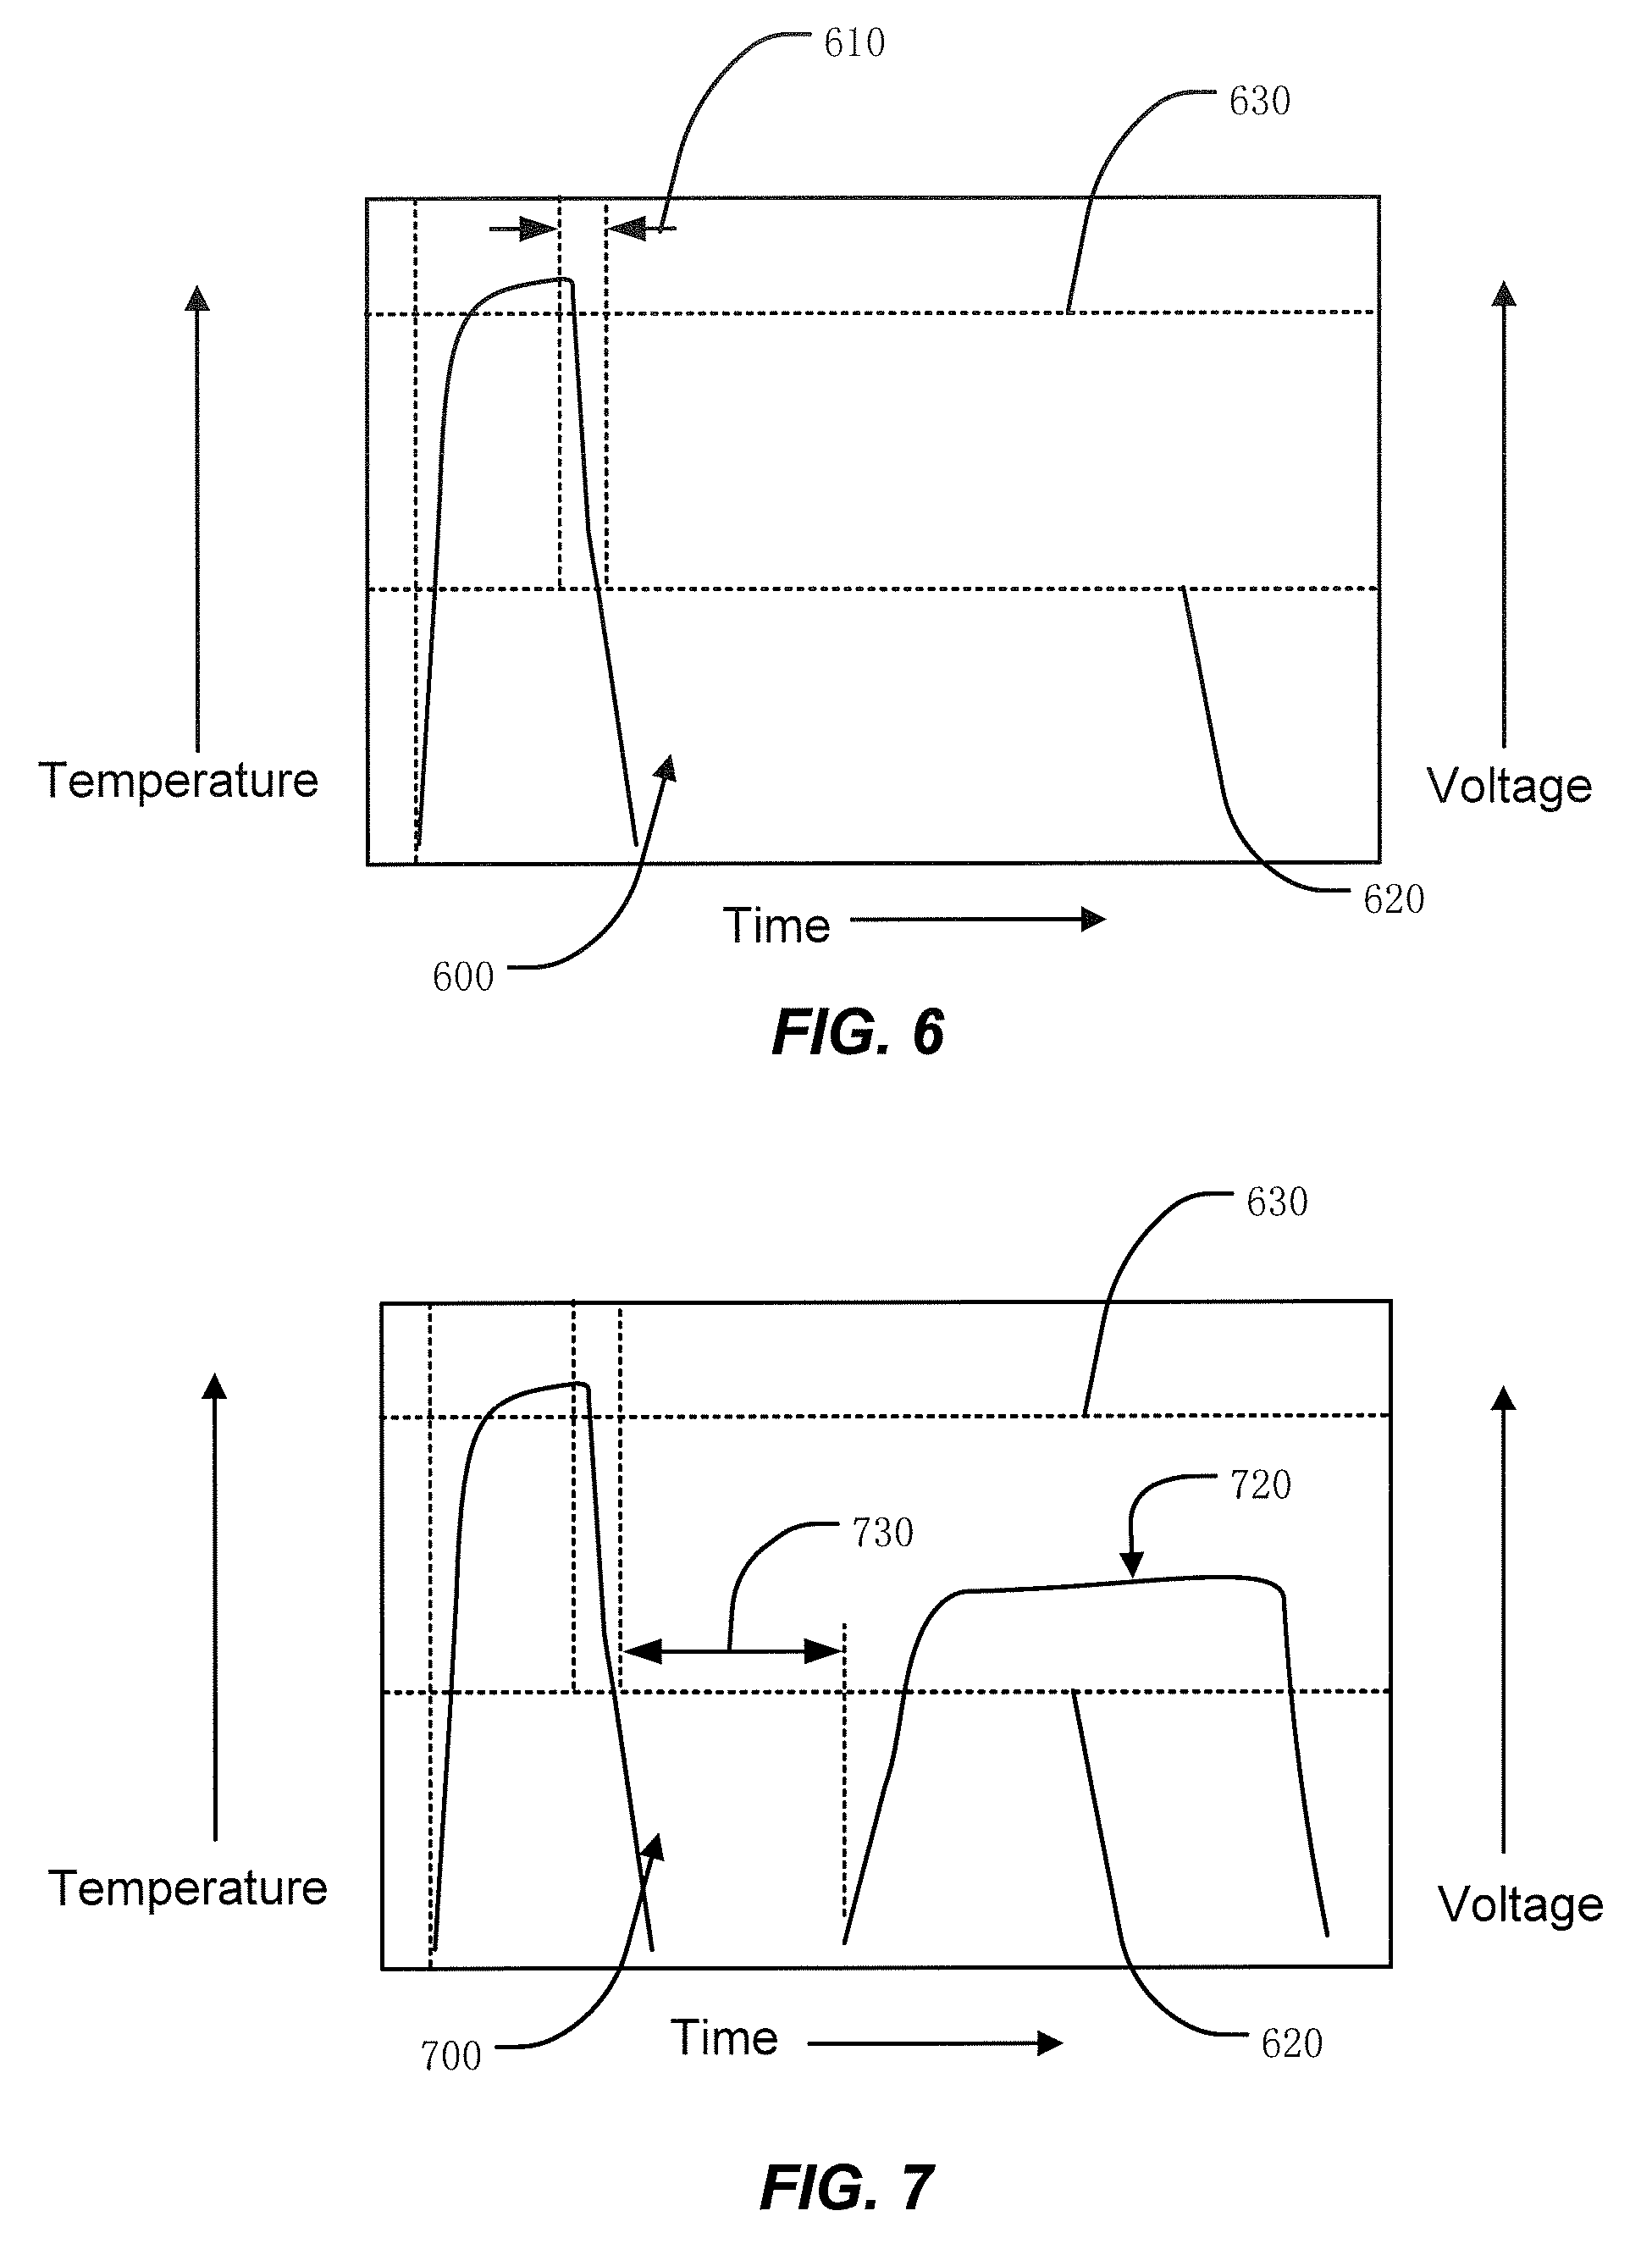 Memory cell device and programming methods